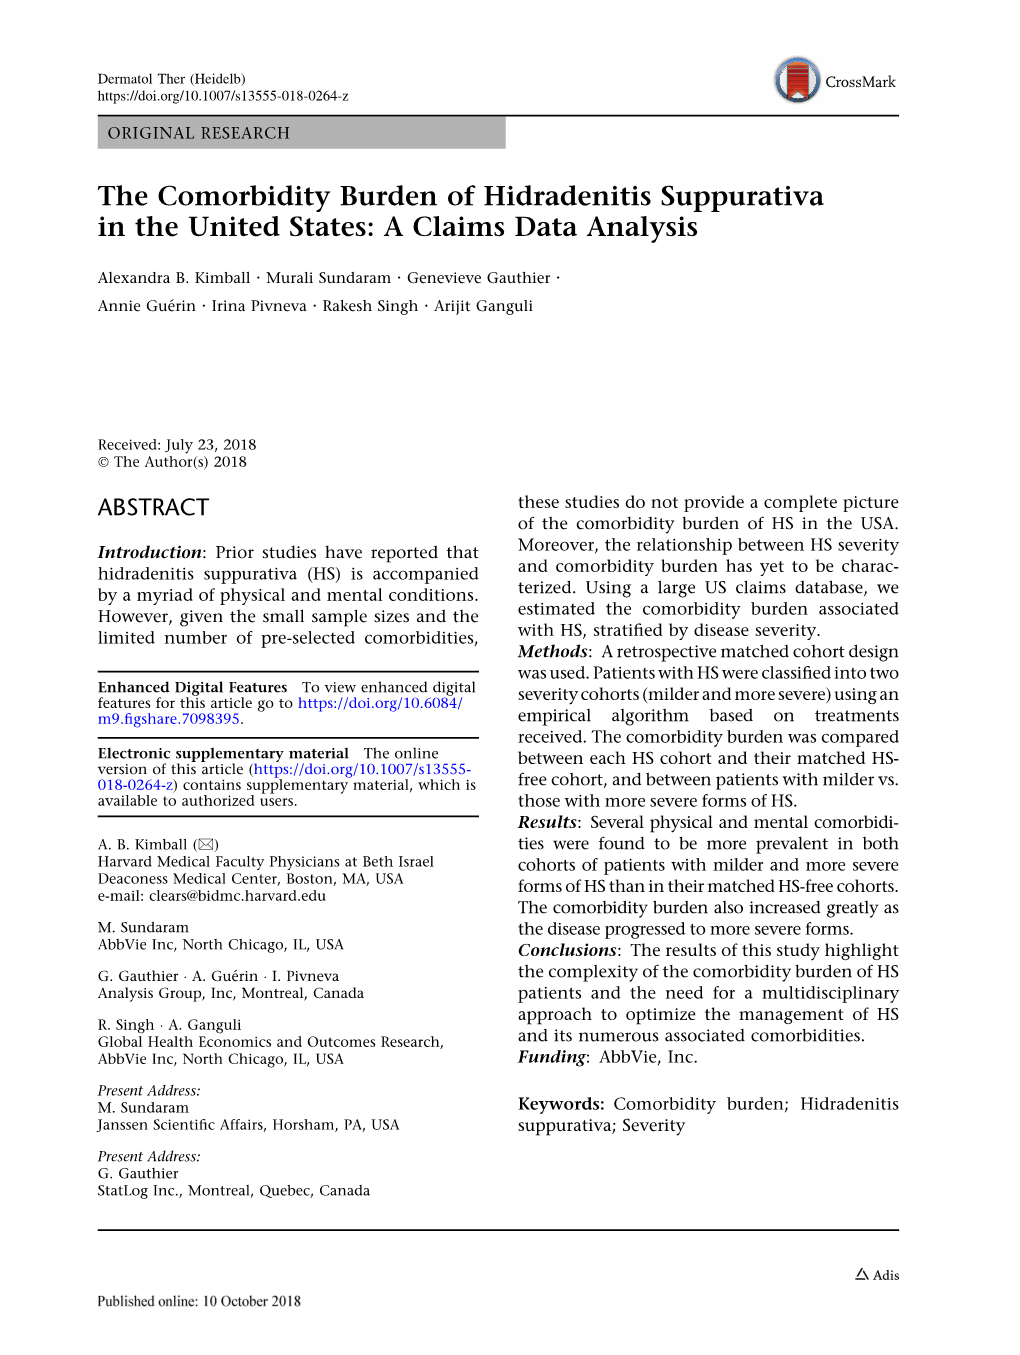 The Comorbidity Burden of Hidradenitis Suppurativa in the United States: a Claims Data Analysis